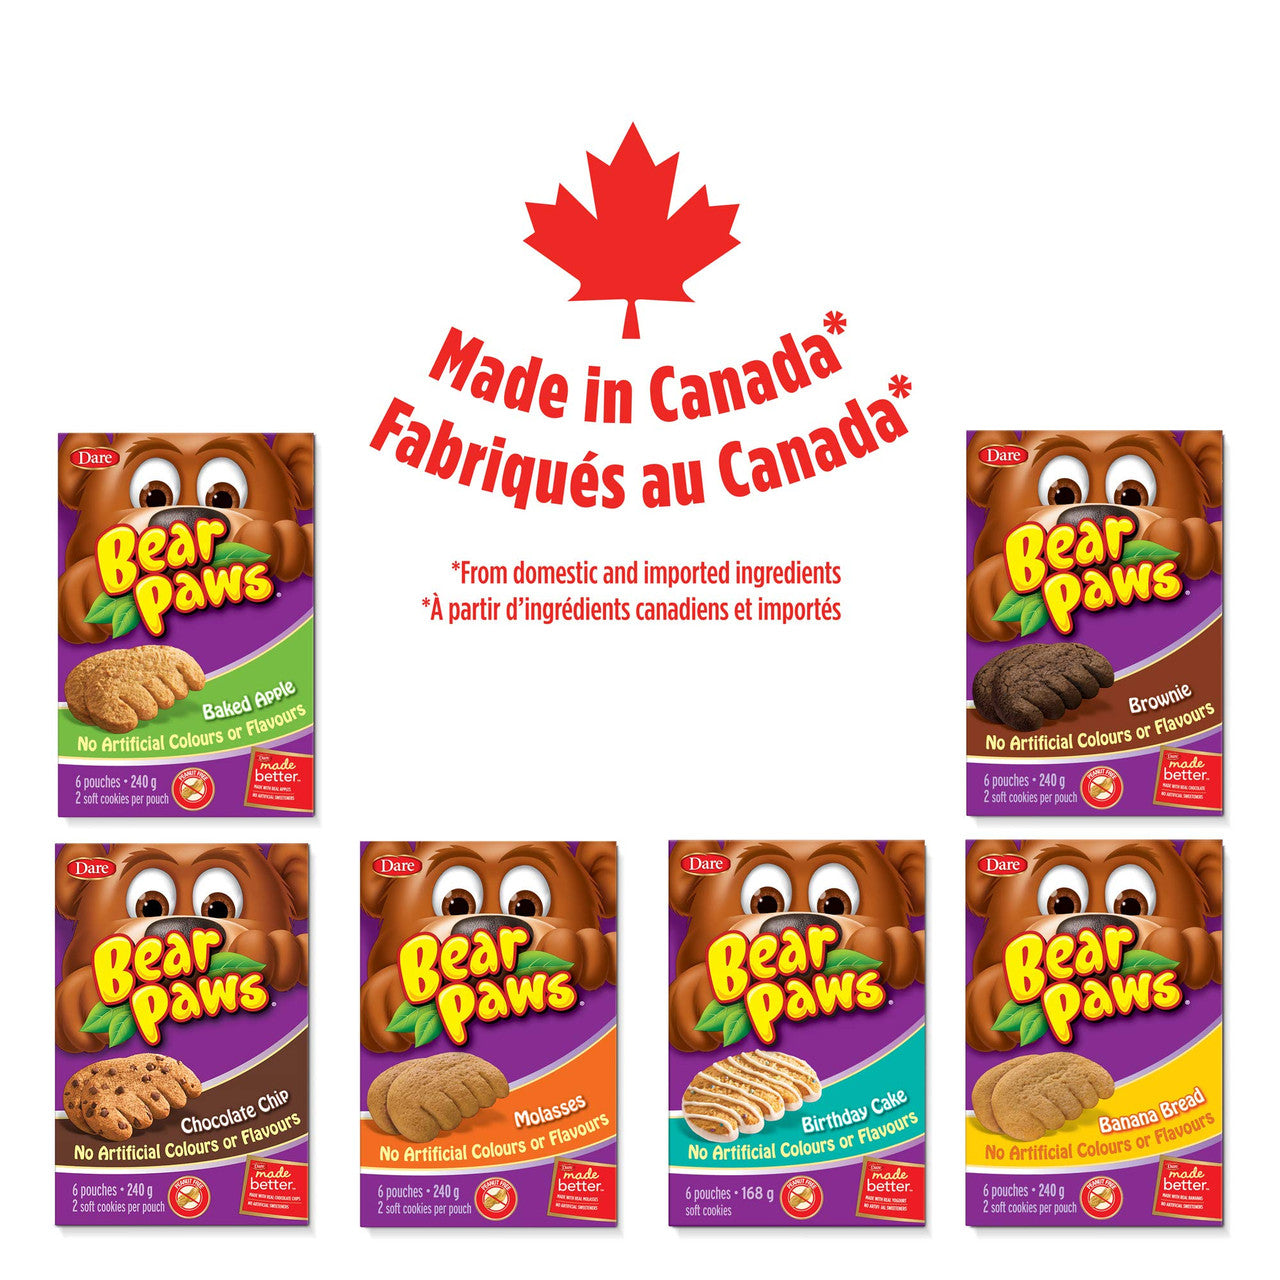 Bear Paws Dare Banana Bread Cookies, Family Size, 480g/17 oz., (12 Pouches) {Imported from Canada}